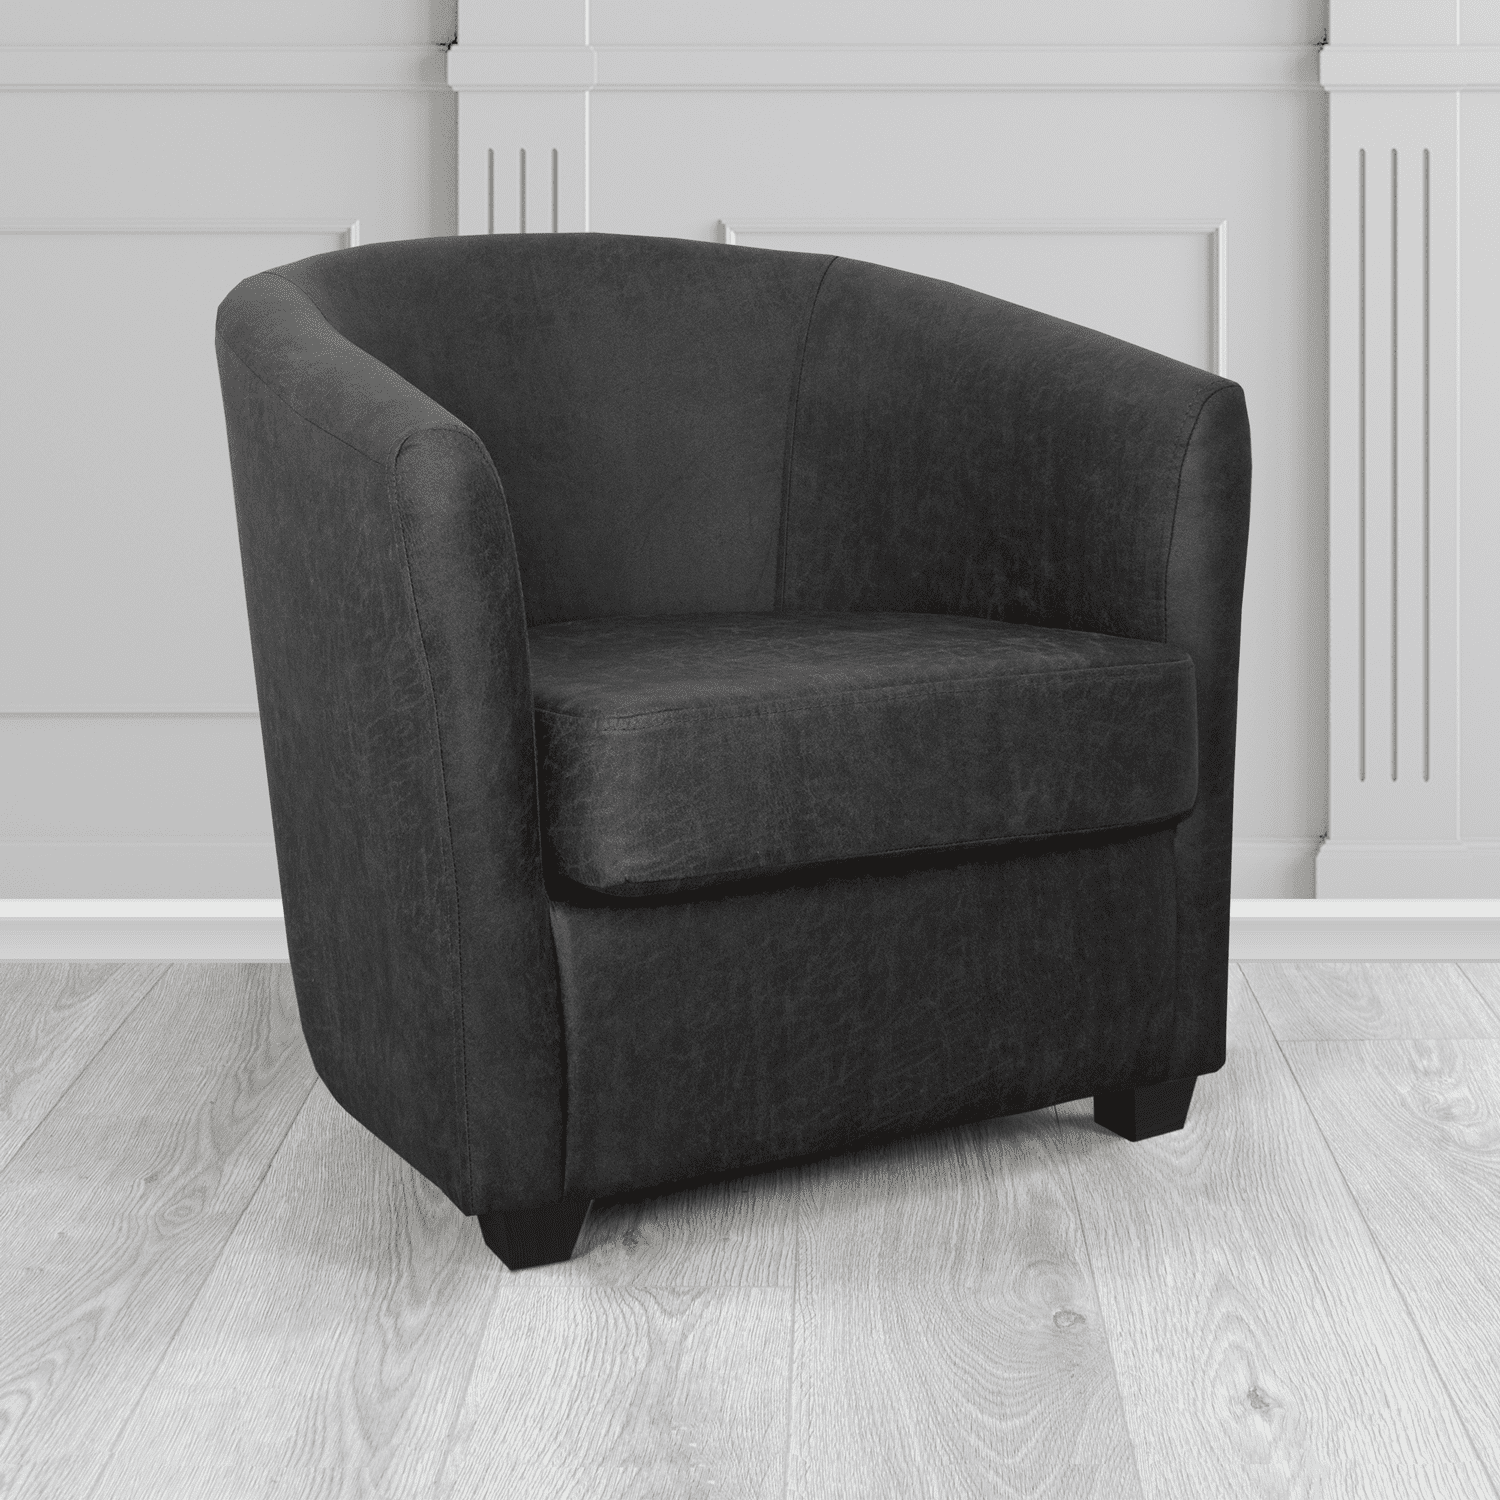 Cannes Tub Chair in Nevada Black Faux Leather - The Tub Chair Shop